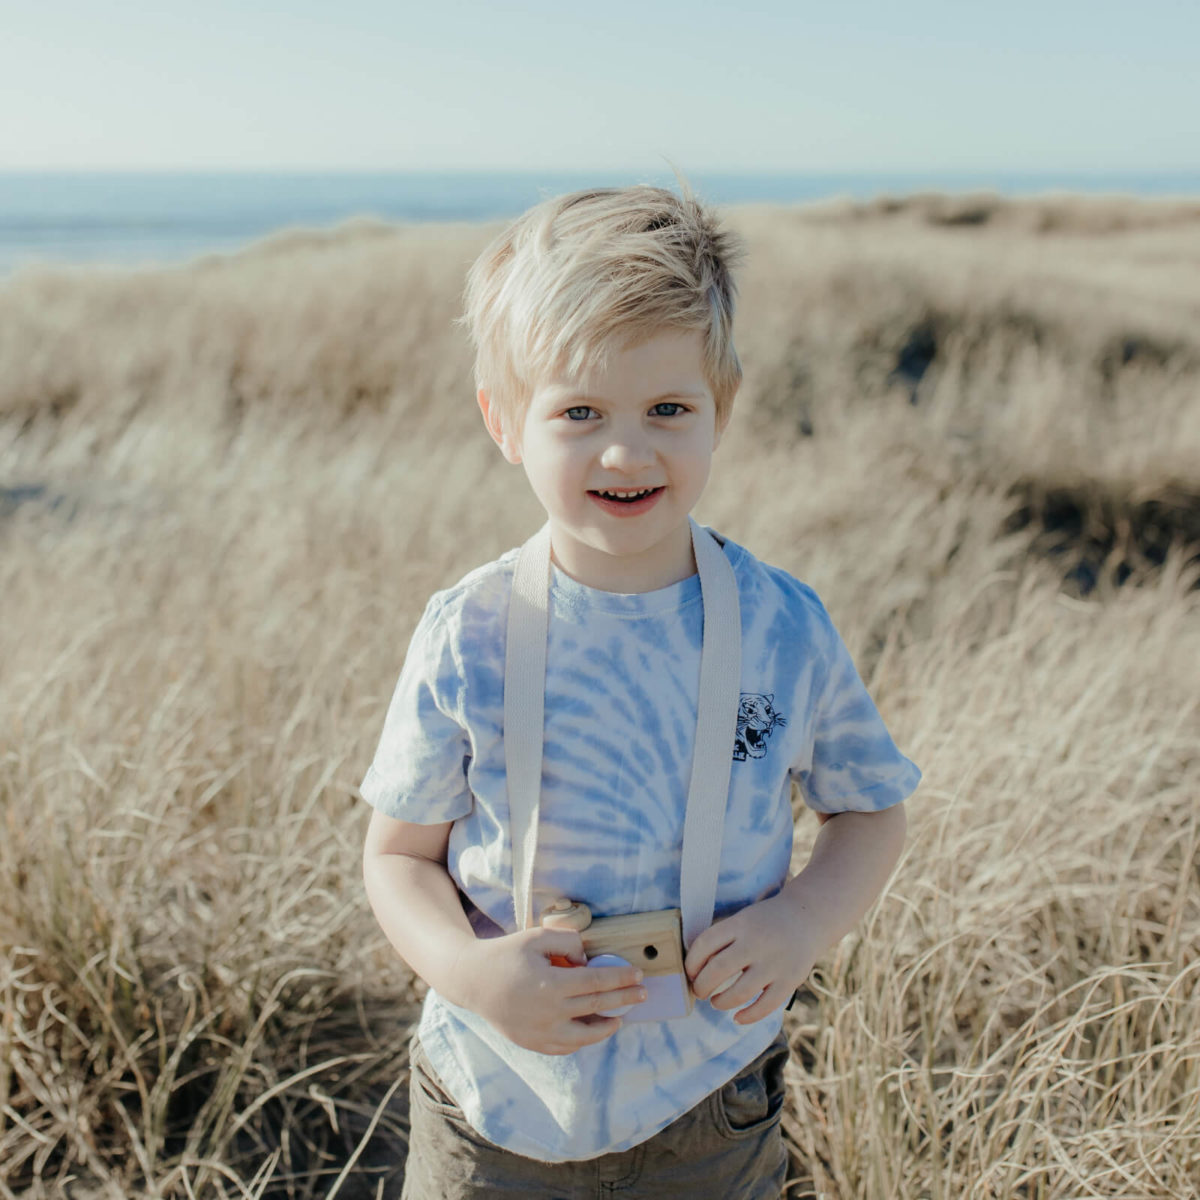 Picture of young boy in sand dunes at beach holding toy camera